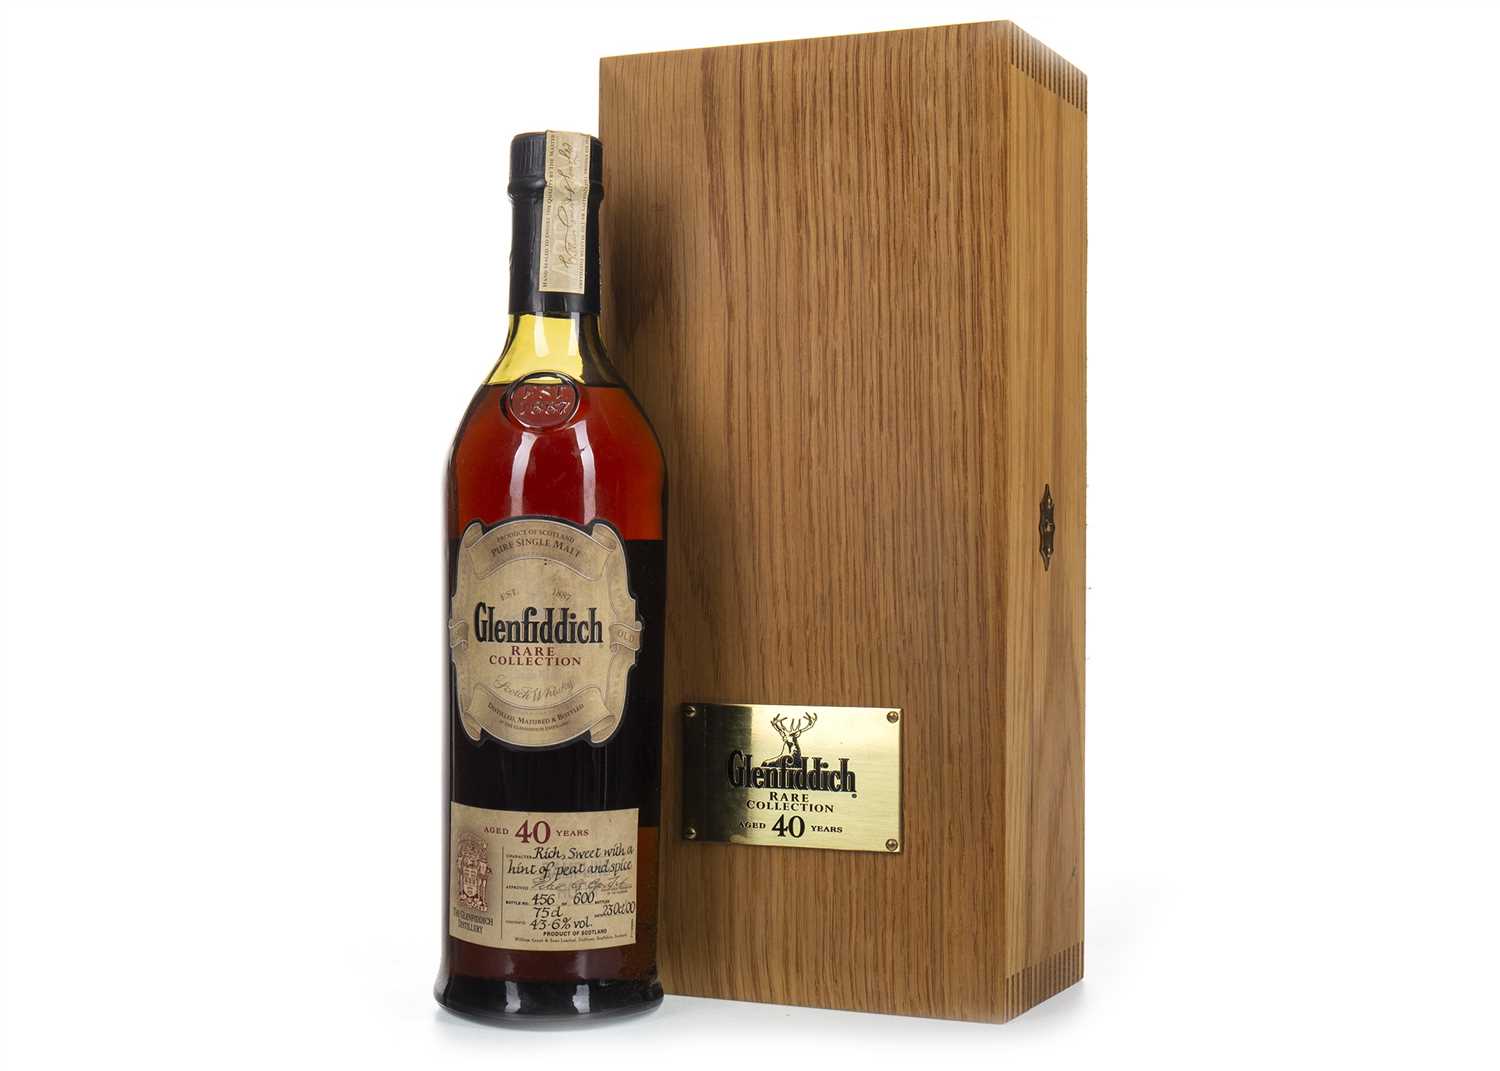 Lot 171 - GLENFIDDICH RARE COLLECTION AGED 40 YEARS - 2000 RELEASE